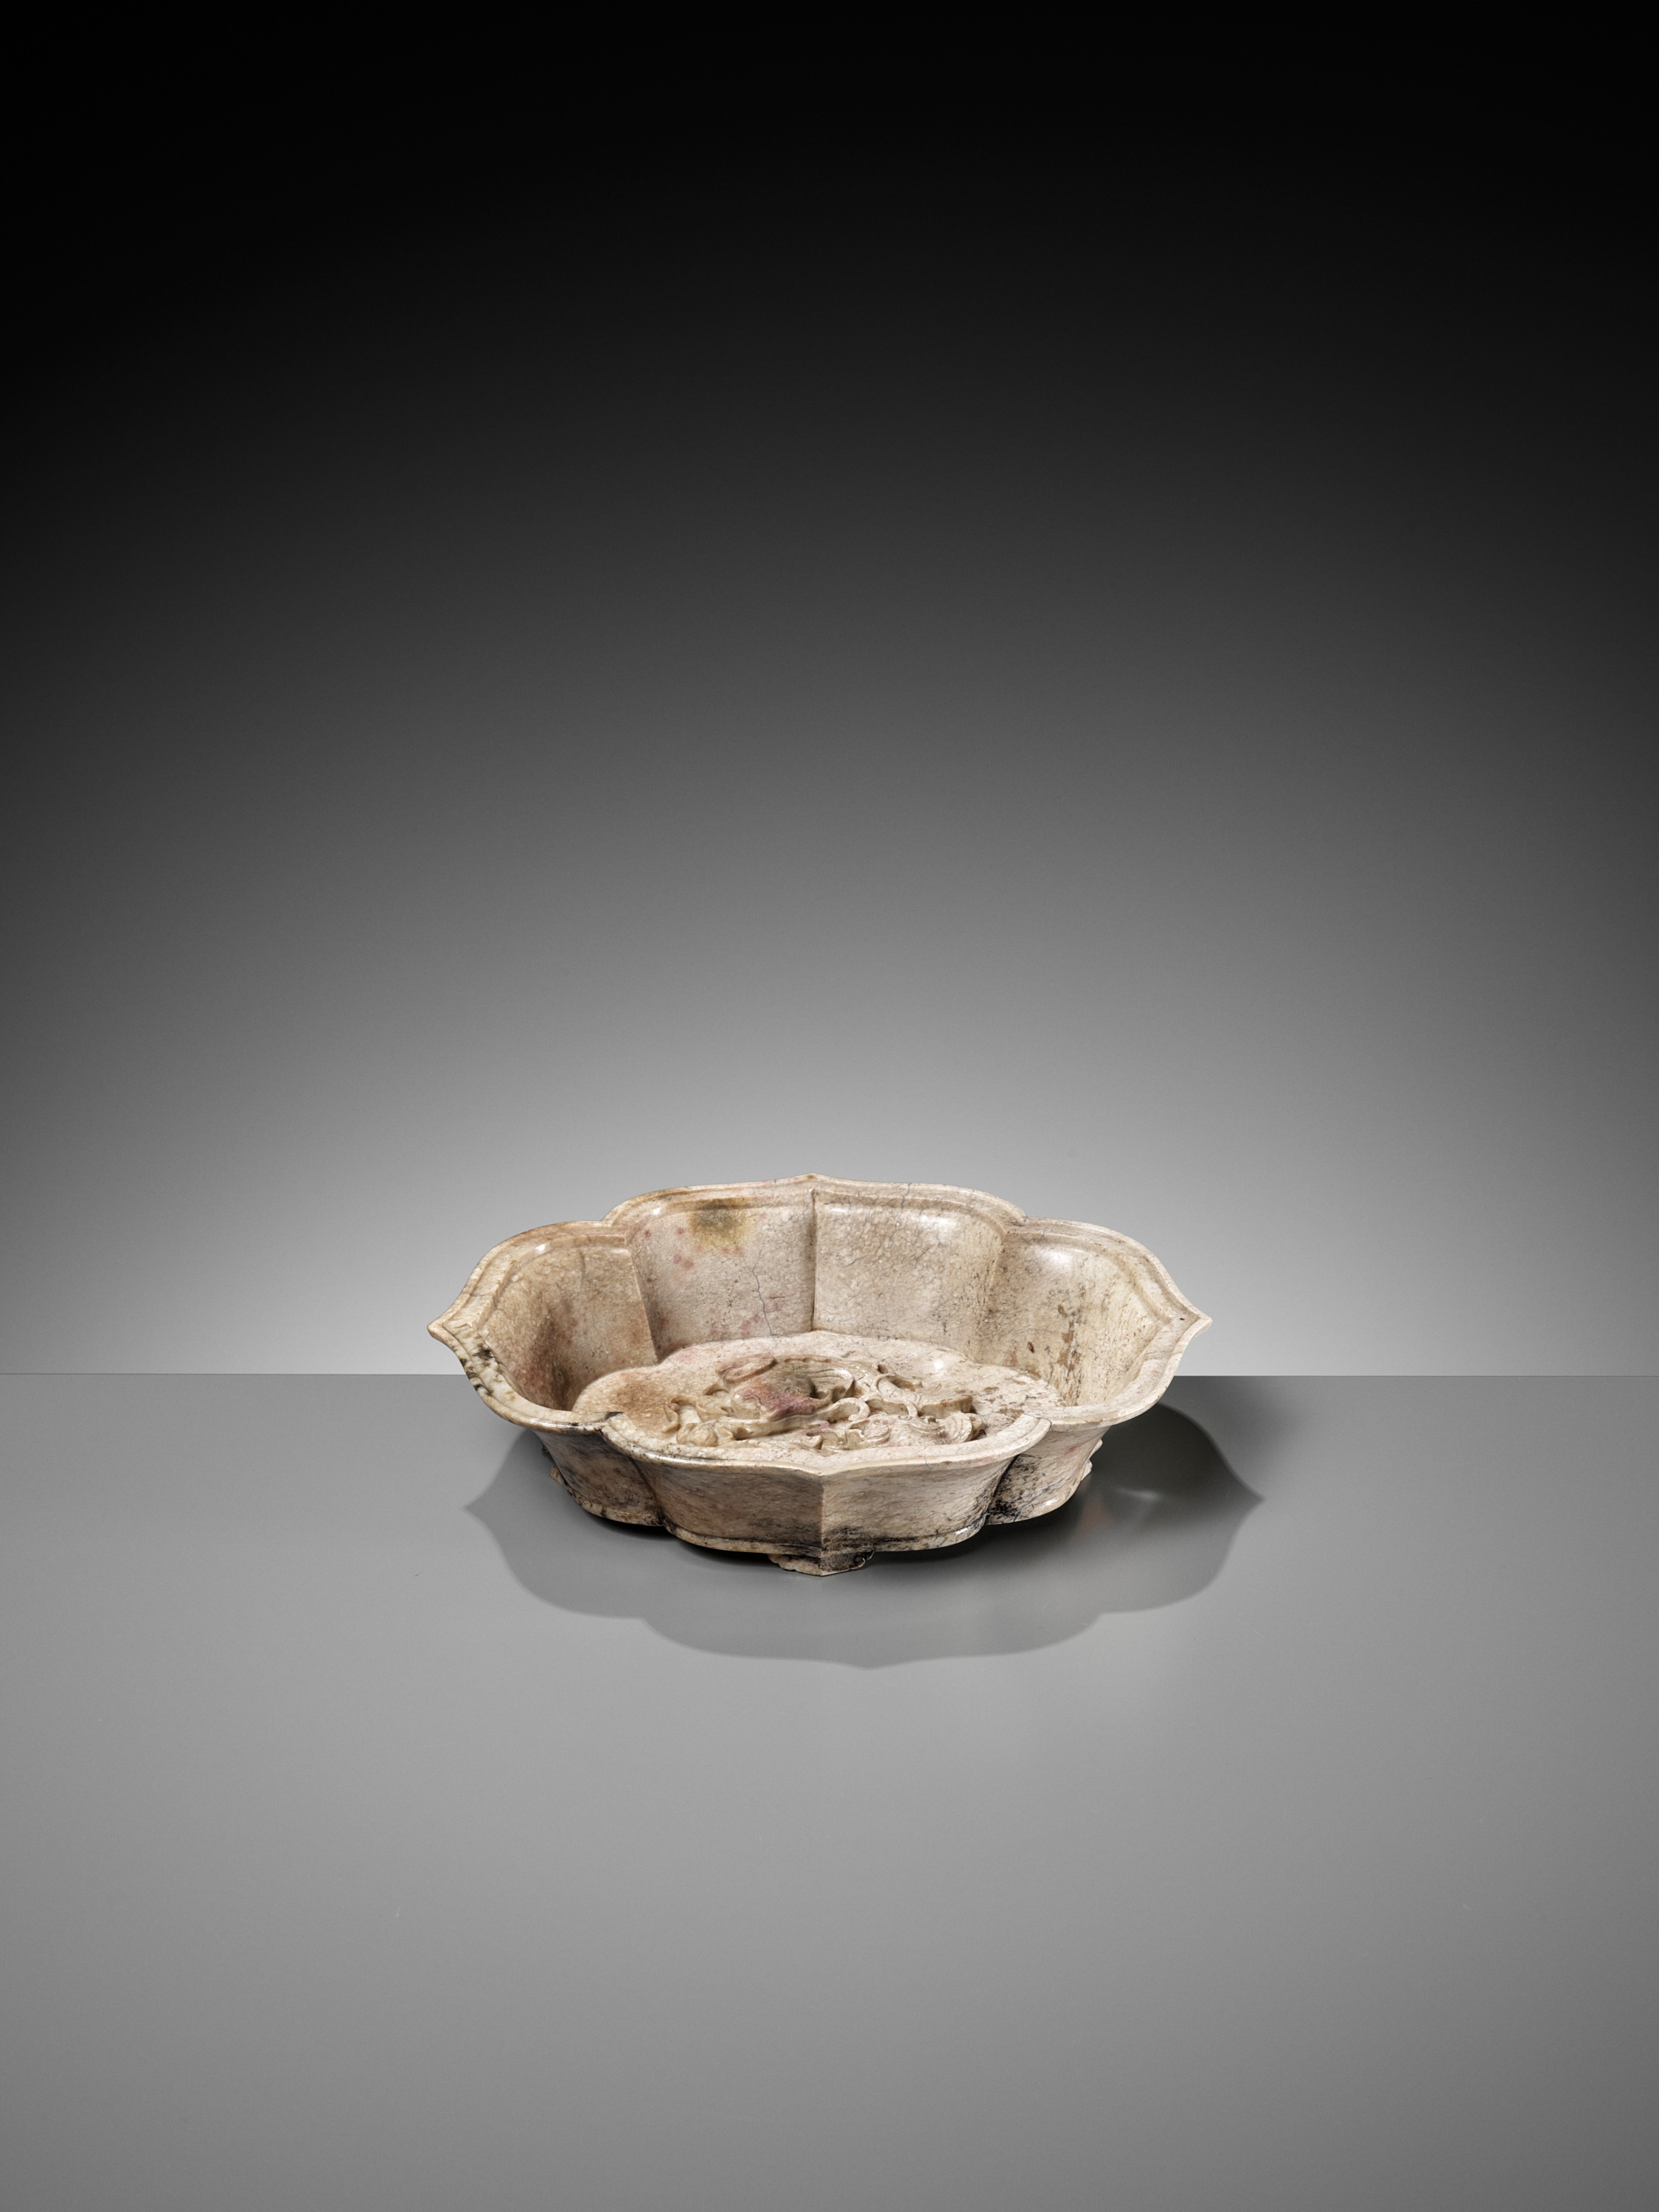 A CHICKEN BONE JADE 'DOUBLE FISH' MARRIAGE BOWL, 17TH-18TH CENTURY - Image 8 of 16